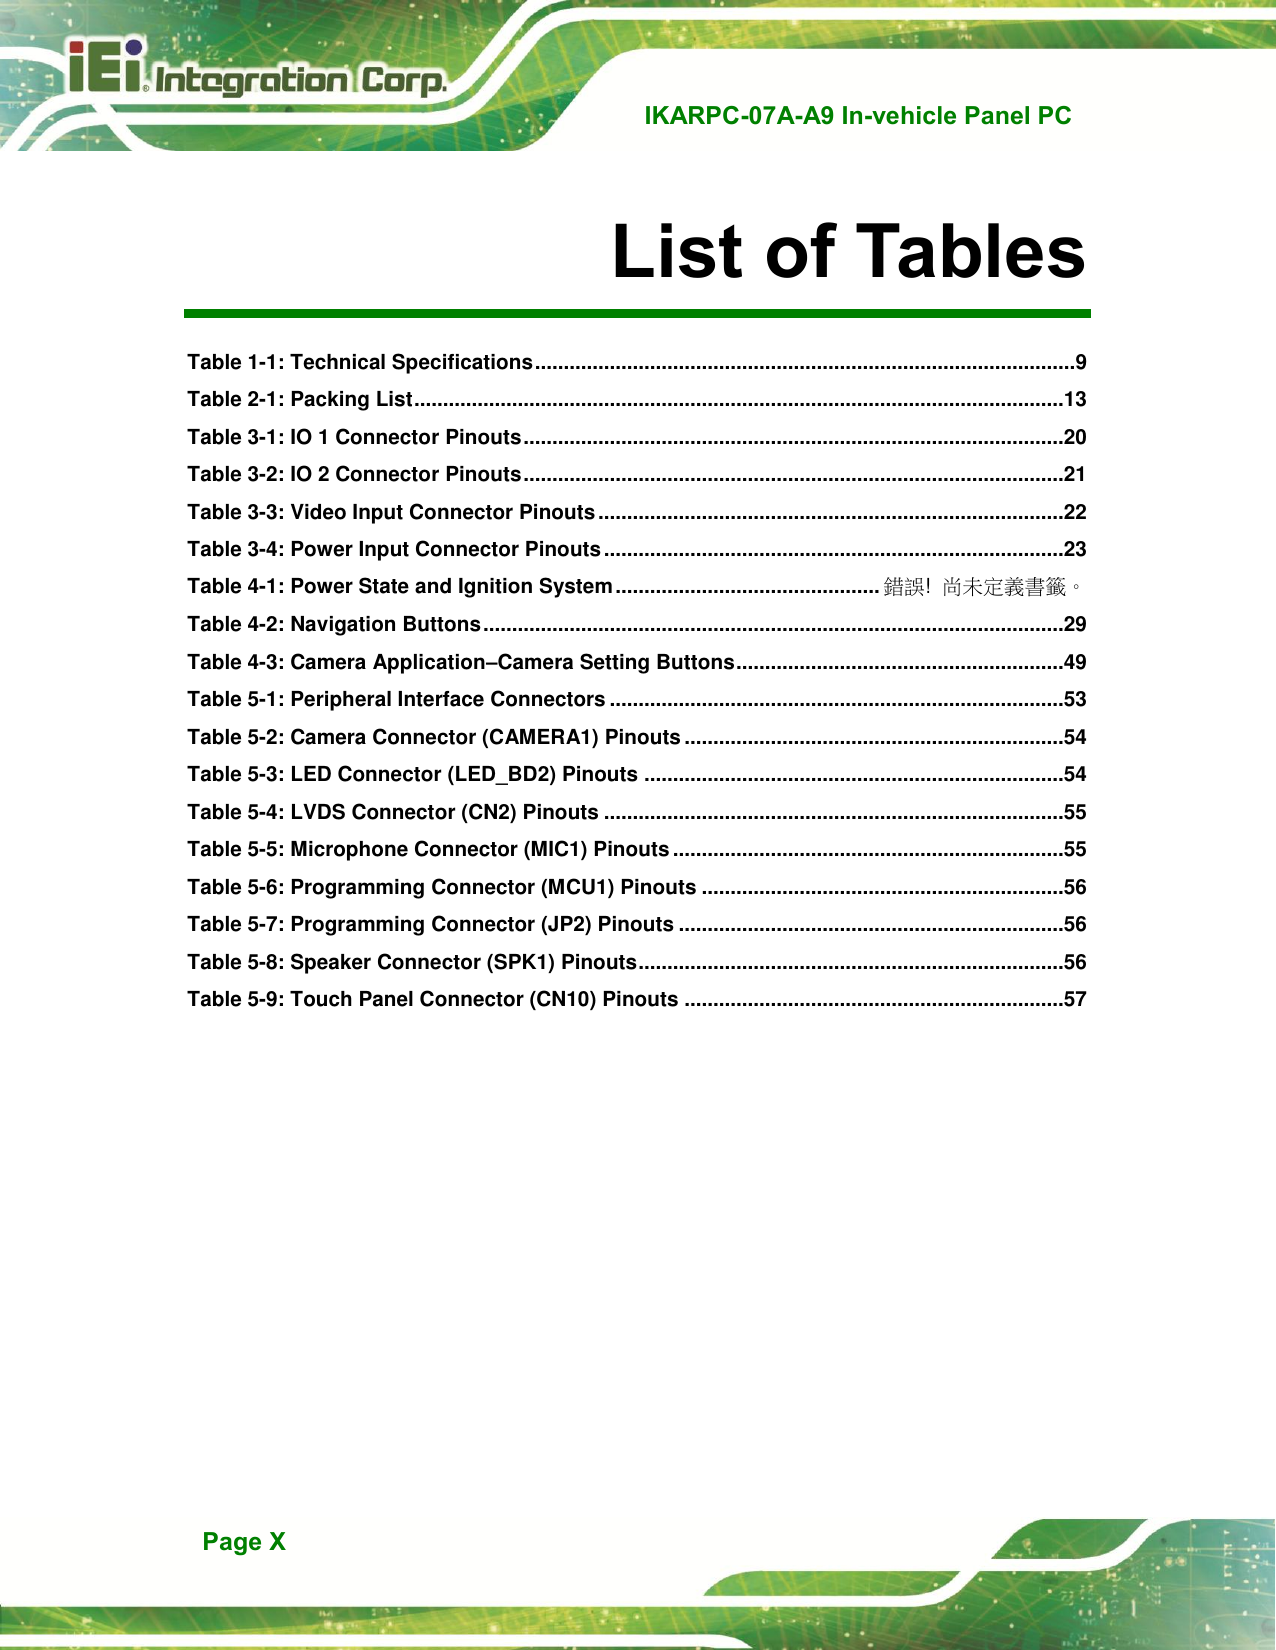   IKARPC-07A-A9 In-vehicle Panel PC  Page X List of Tables Table 1-1: Technical Specifications .............................................................................................. 9 Table 2-1: Packing List .................................................................................................................13 Table 3-1: IO 1 Connector Pinouts ..............................................................................................20 Table 3-2: IO 2 Connector Pinouts ..............................................................................................21 Table 3-3: Video Input Connector Pinouts .................................................................................22 Table 3-4: Power Input Connector Pinouts ................................................................................23 Table 4-1: Power State and Ignition System .............................................. 錯誤!  尚未定義書籤。 Table 4-2: Navigation Buttons .....................................................................................................29 Table 4-3: Camera Application–Camera Setting Buttons .........................................................49 Table 5-1: Peripheral Interface Connectors ...............................................................................53 Table 5-2: Camera Connector (CAMERA1) Pinouts ..................................................................54 Table 5-3: LED Connector (LED_BD2) Pinouts .........................................................................54 Table 5-4: LVDS Connector (CN2) Pinouts ................................................................................55 Table 5-5: Microphone Connector (MIC1) Pinouts ....................................................................55 Table 5-6: Programming Connector (MCU1) Pinouts ...............................................................56 Table 5-7: Programming Connector (JP2) Pinouts ...................................................................56 Table 5-8: Speaker Connector (SPK1) Pinouts ..........................................................................56 Table 5-9: Touch Panel Connector (CN10) Pinouts ..................................................................57 